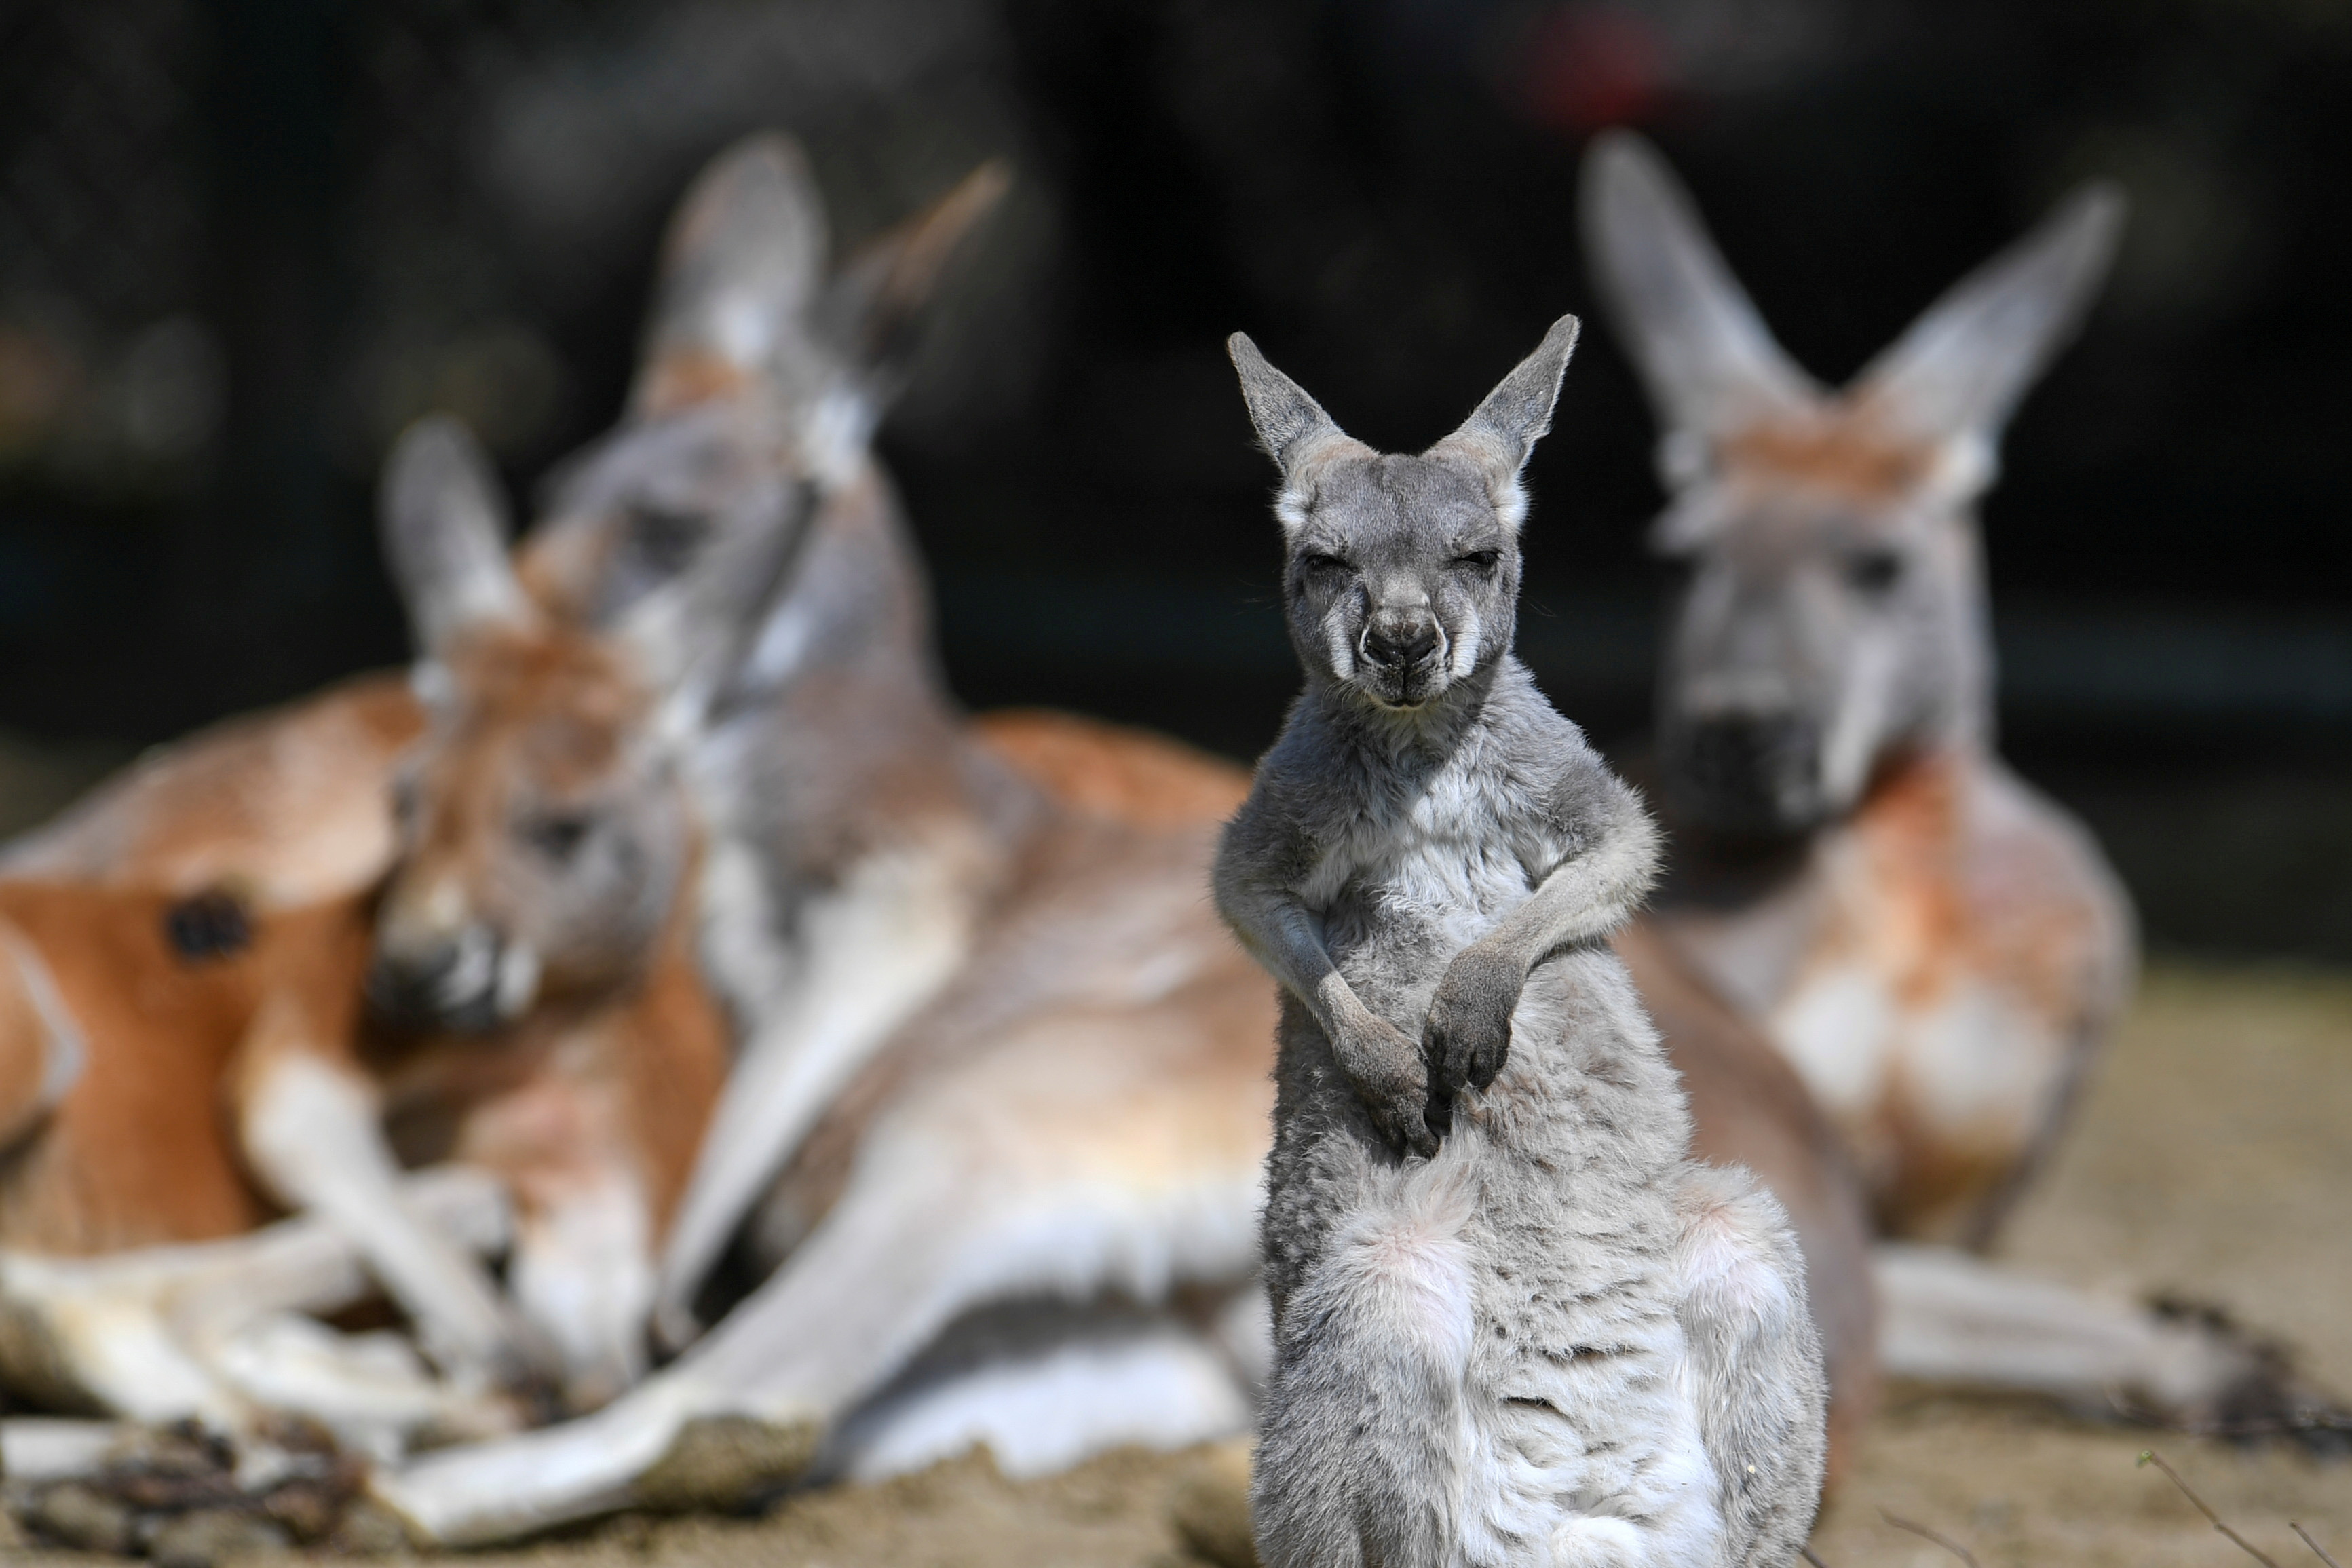 A young red kangaroo looks on at Hellabrunn Zoo in Munich